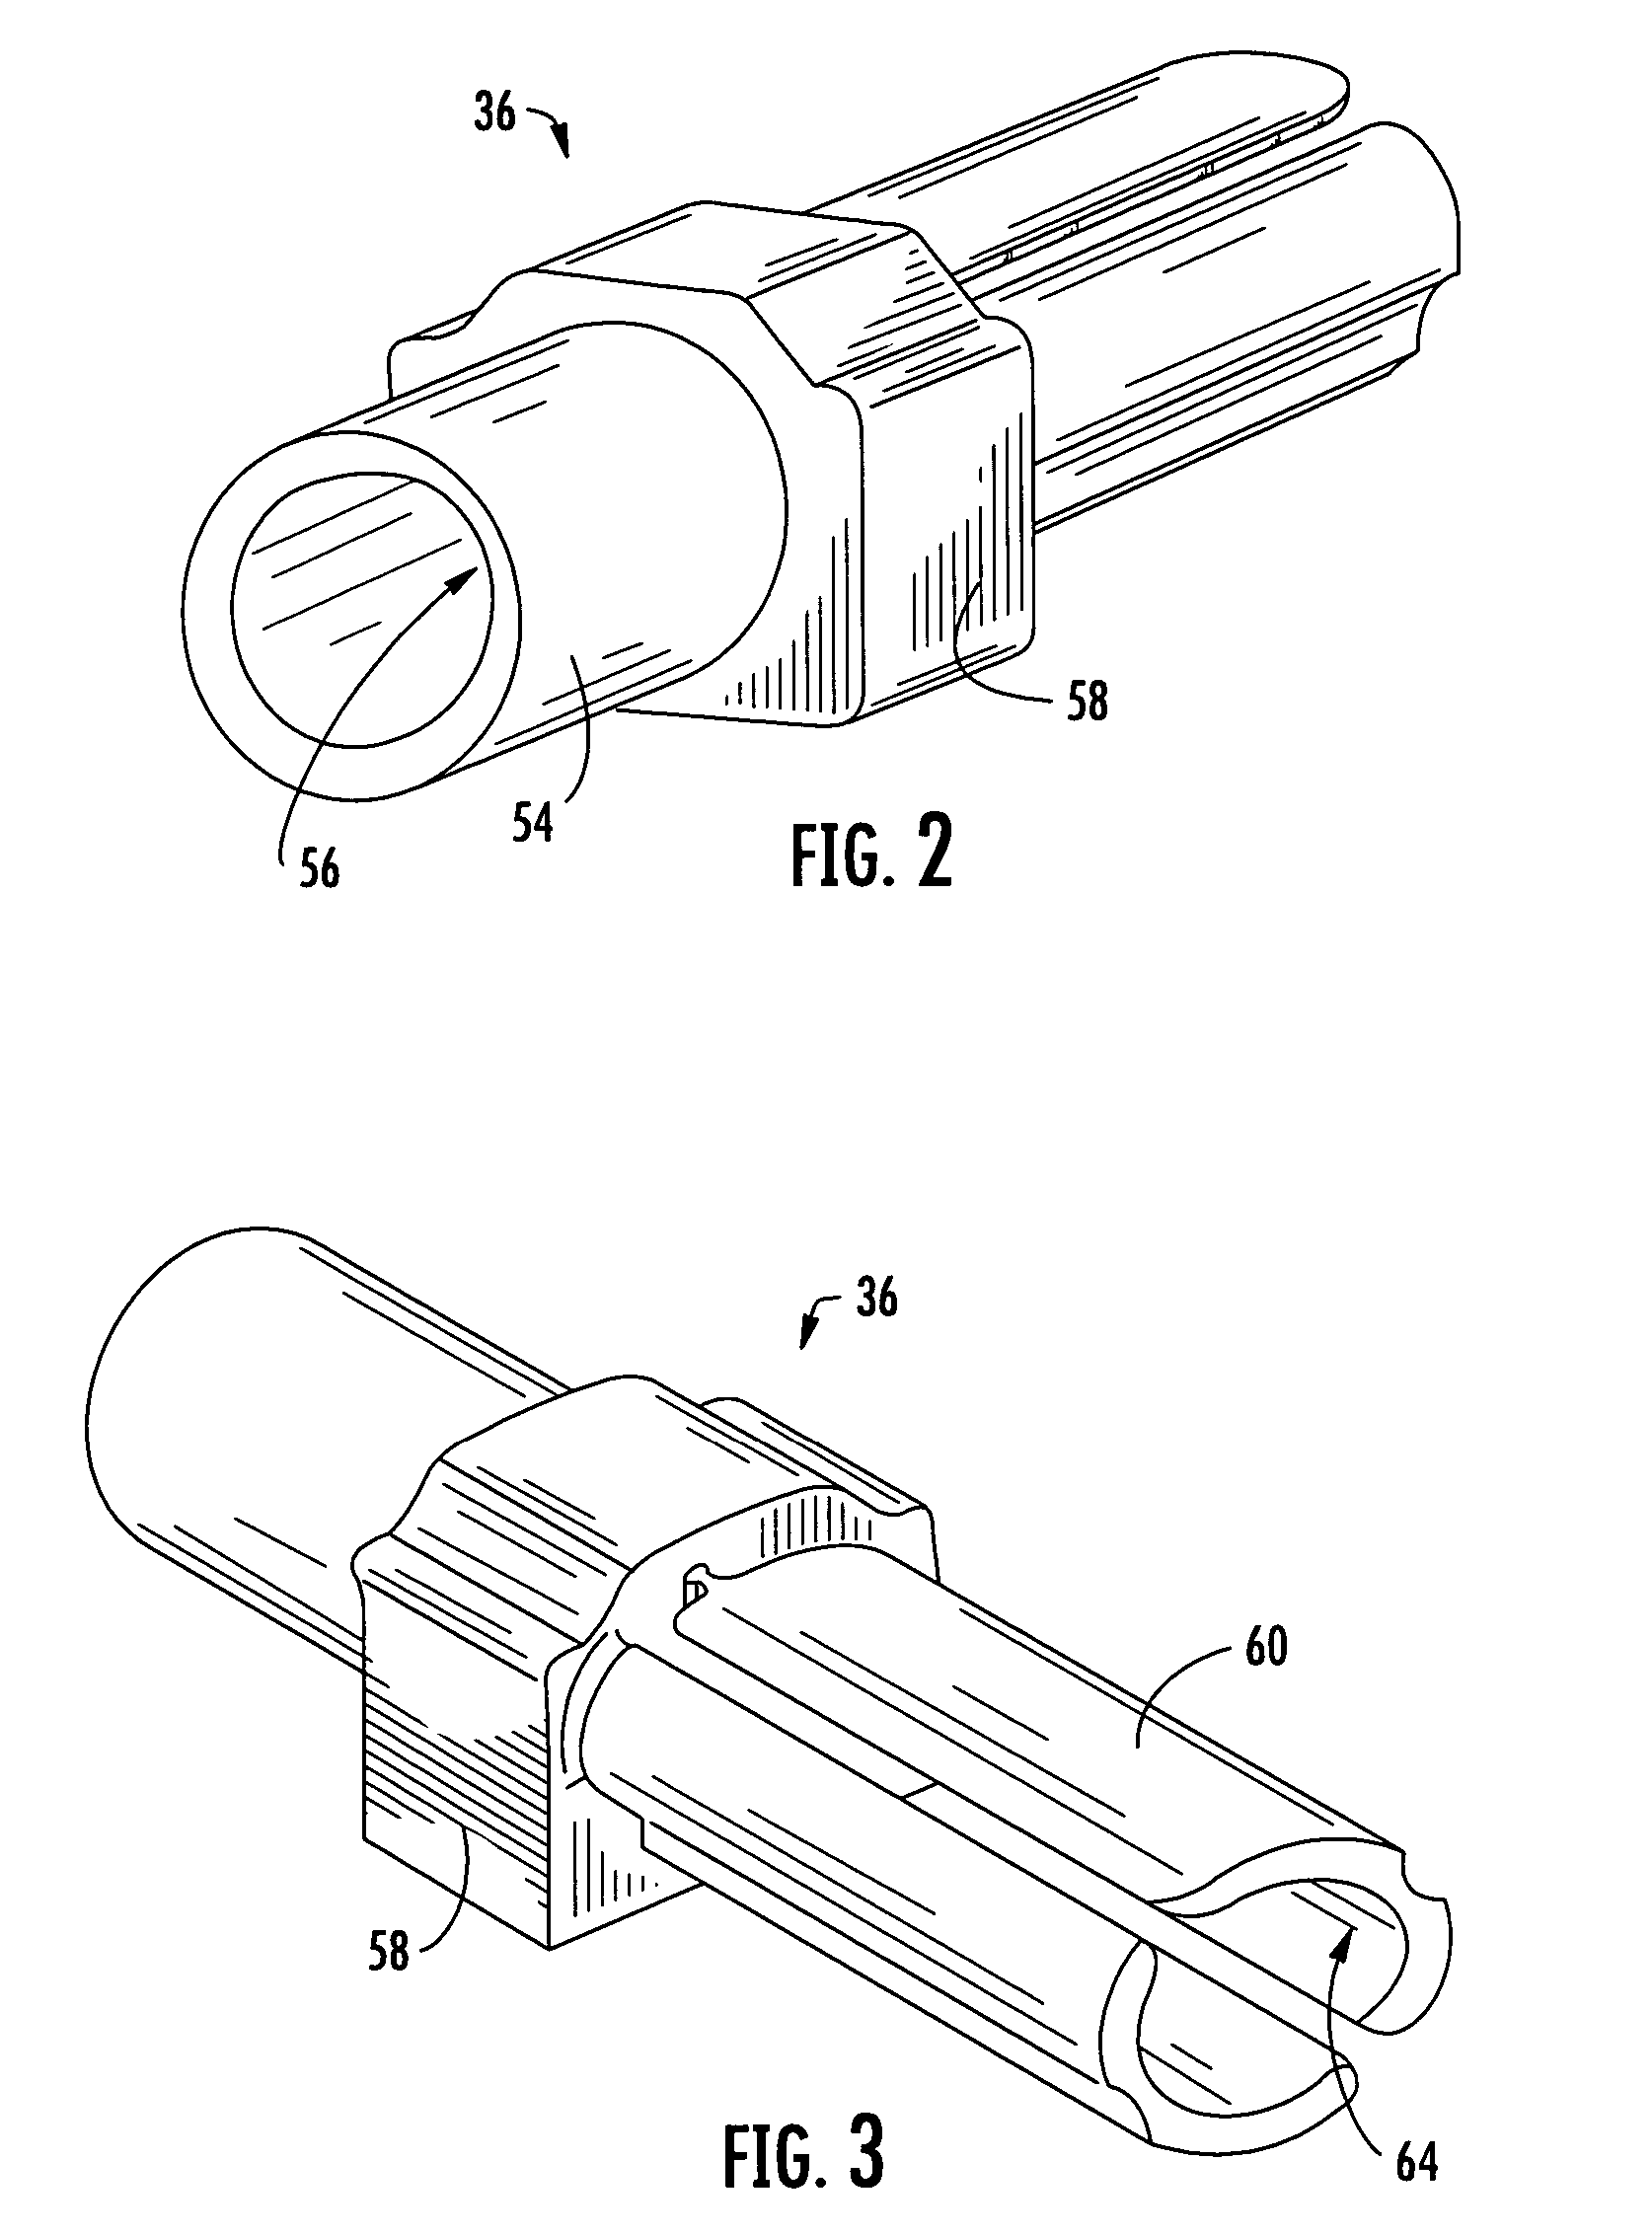 Mechanical splice connector with sequential splice and strain relief